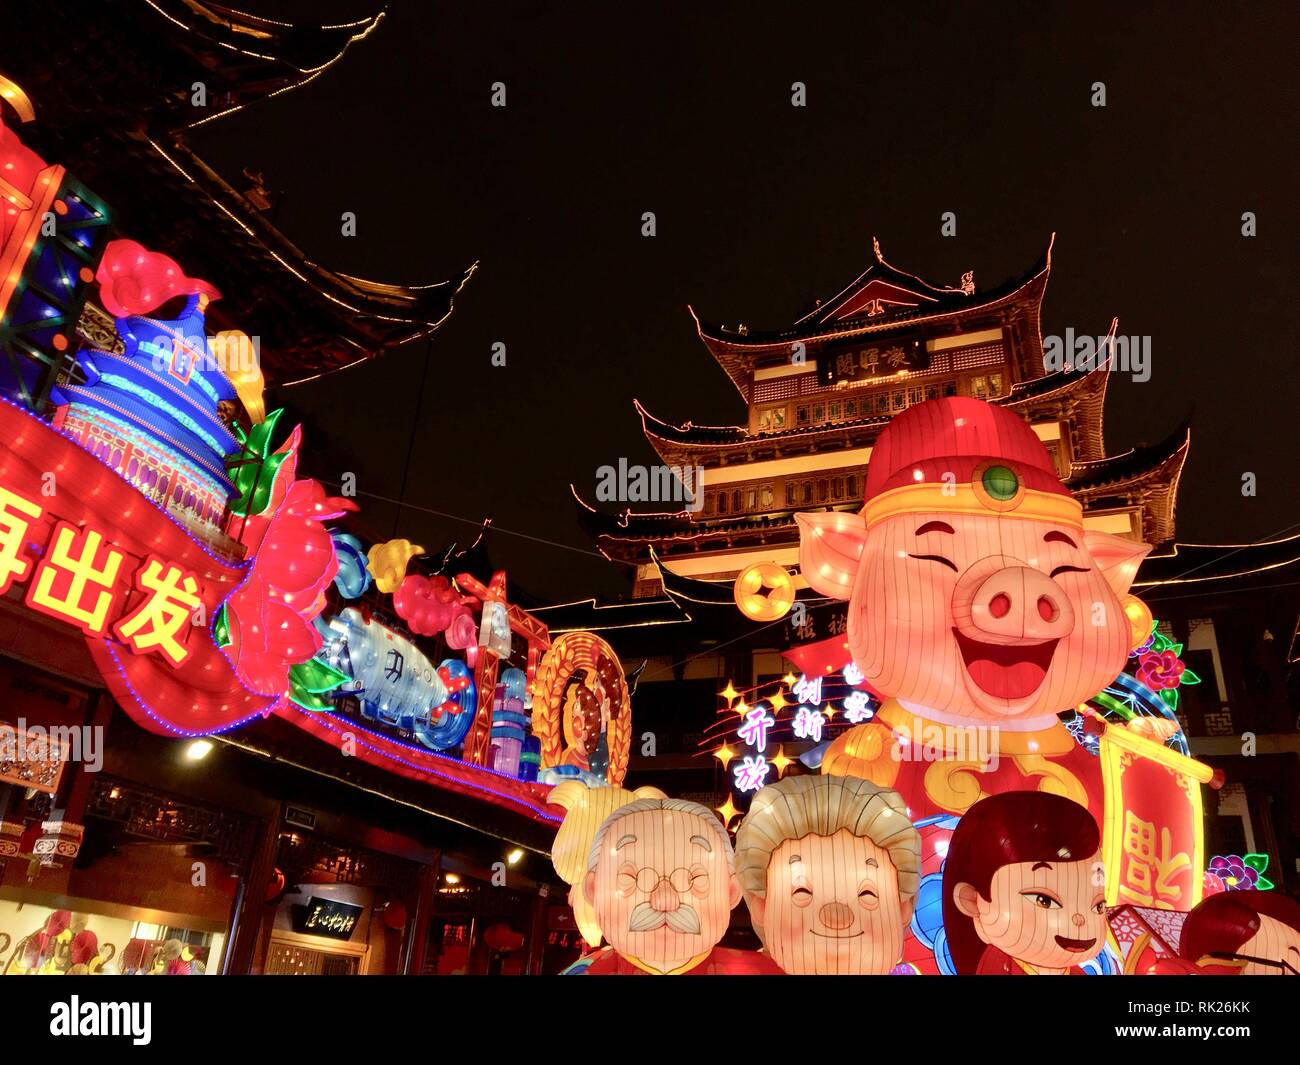 Colorful Chinese New Year decoration for the year of the pig and traditional Chinese architecture in Yuyuan Garden. 02/07/2019. Shanghai, China. Stock Photo